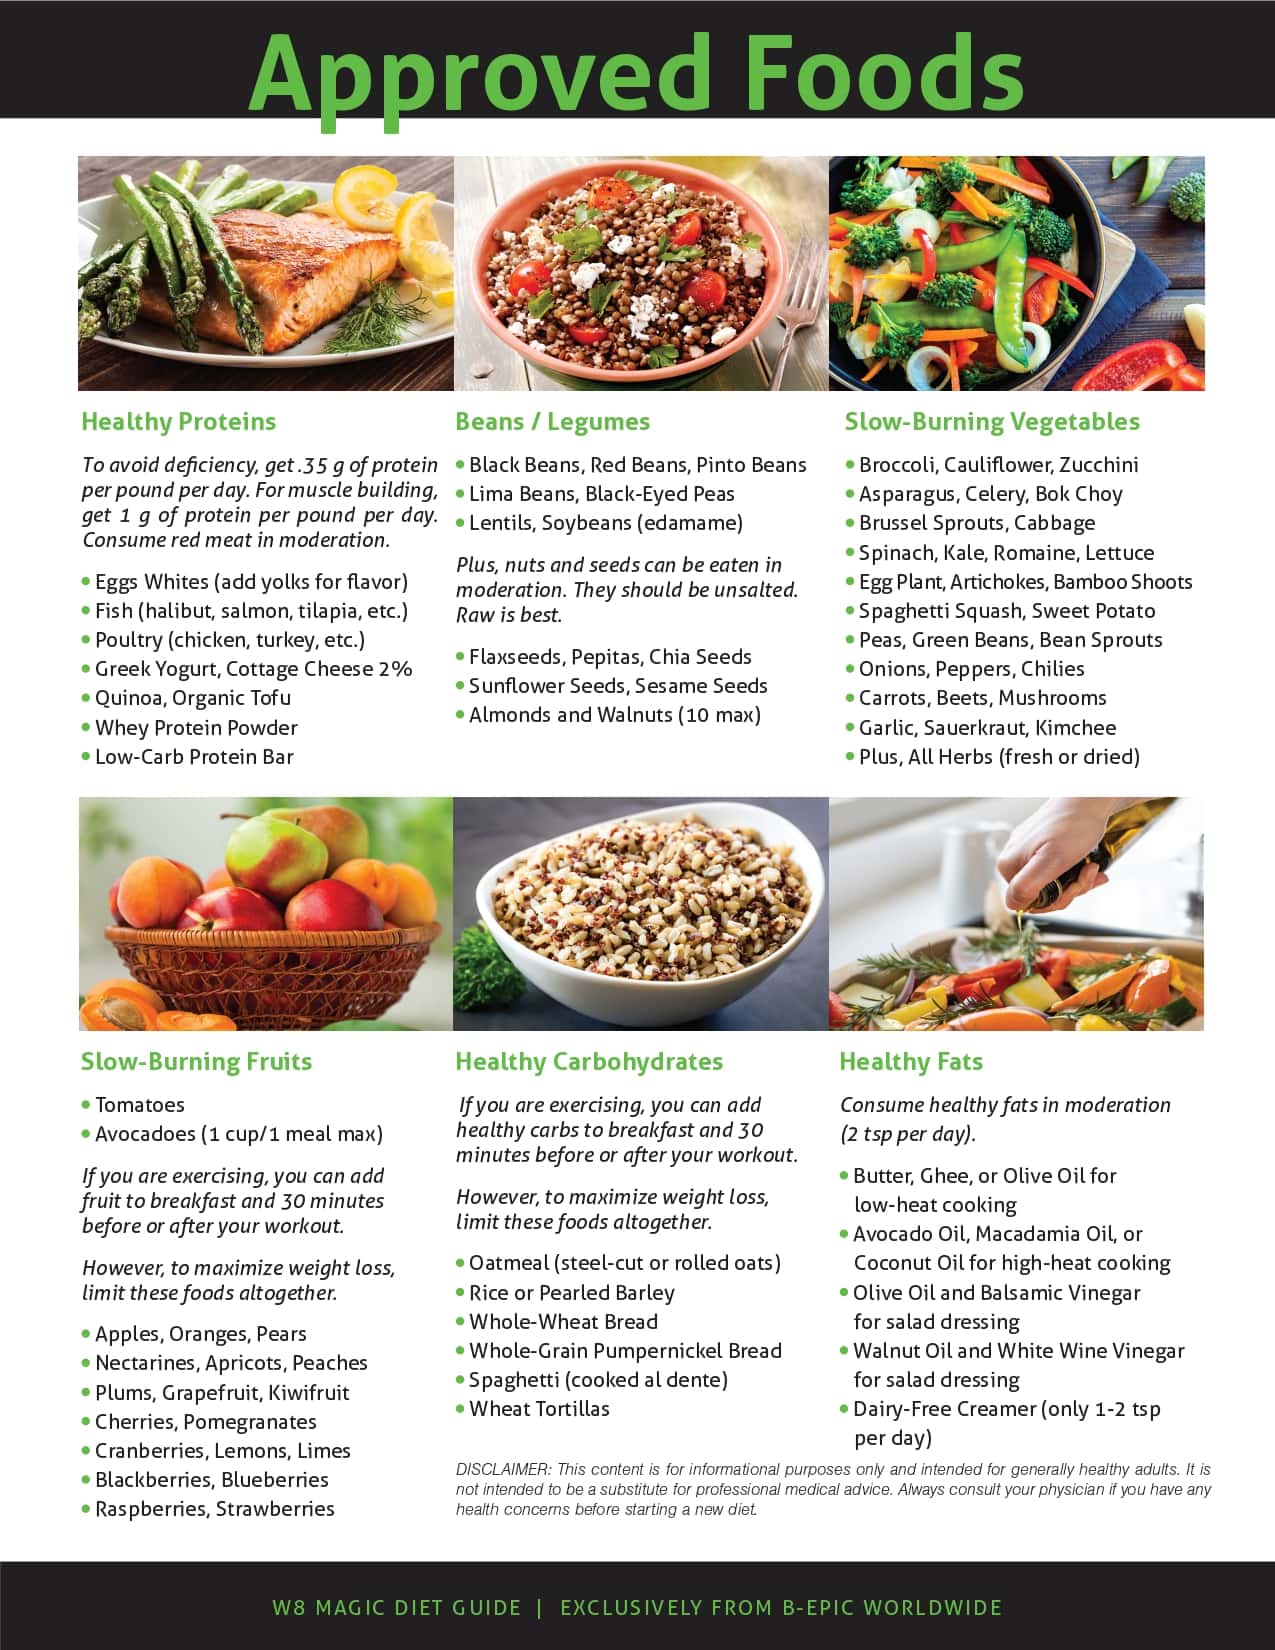 W8 Magic Diet Guide - page 2